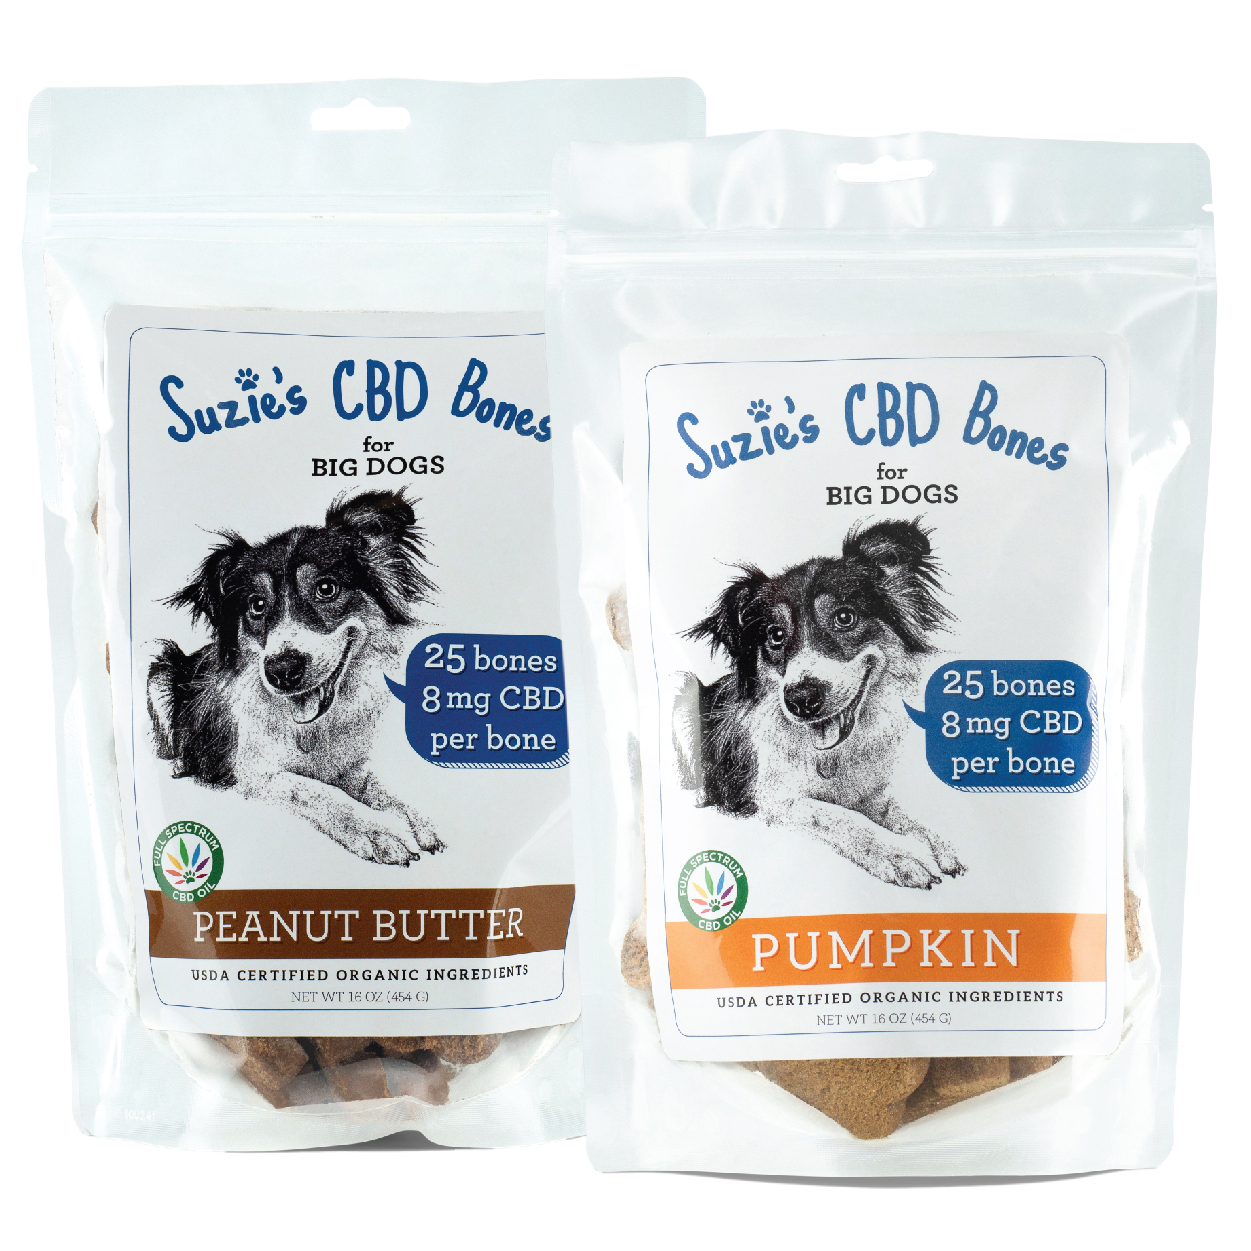 Puppy Serenity: CBD-Enriched Treats for Wellbeing